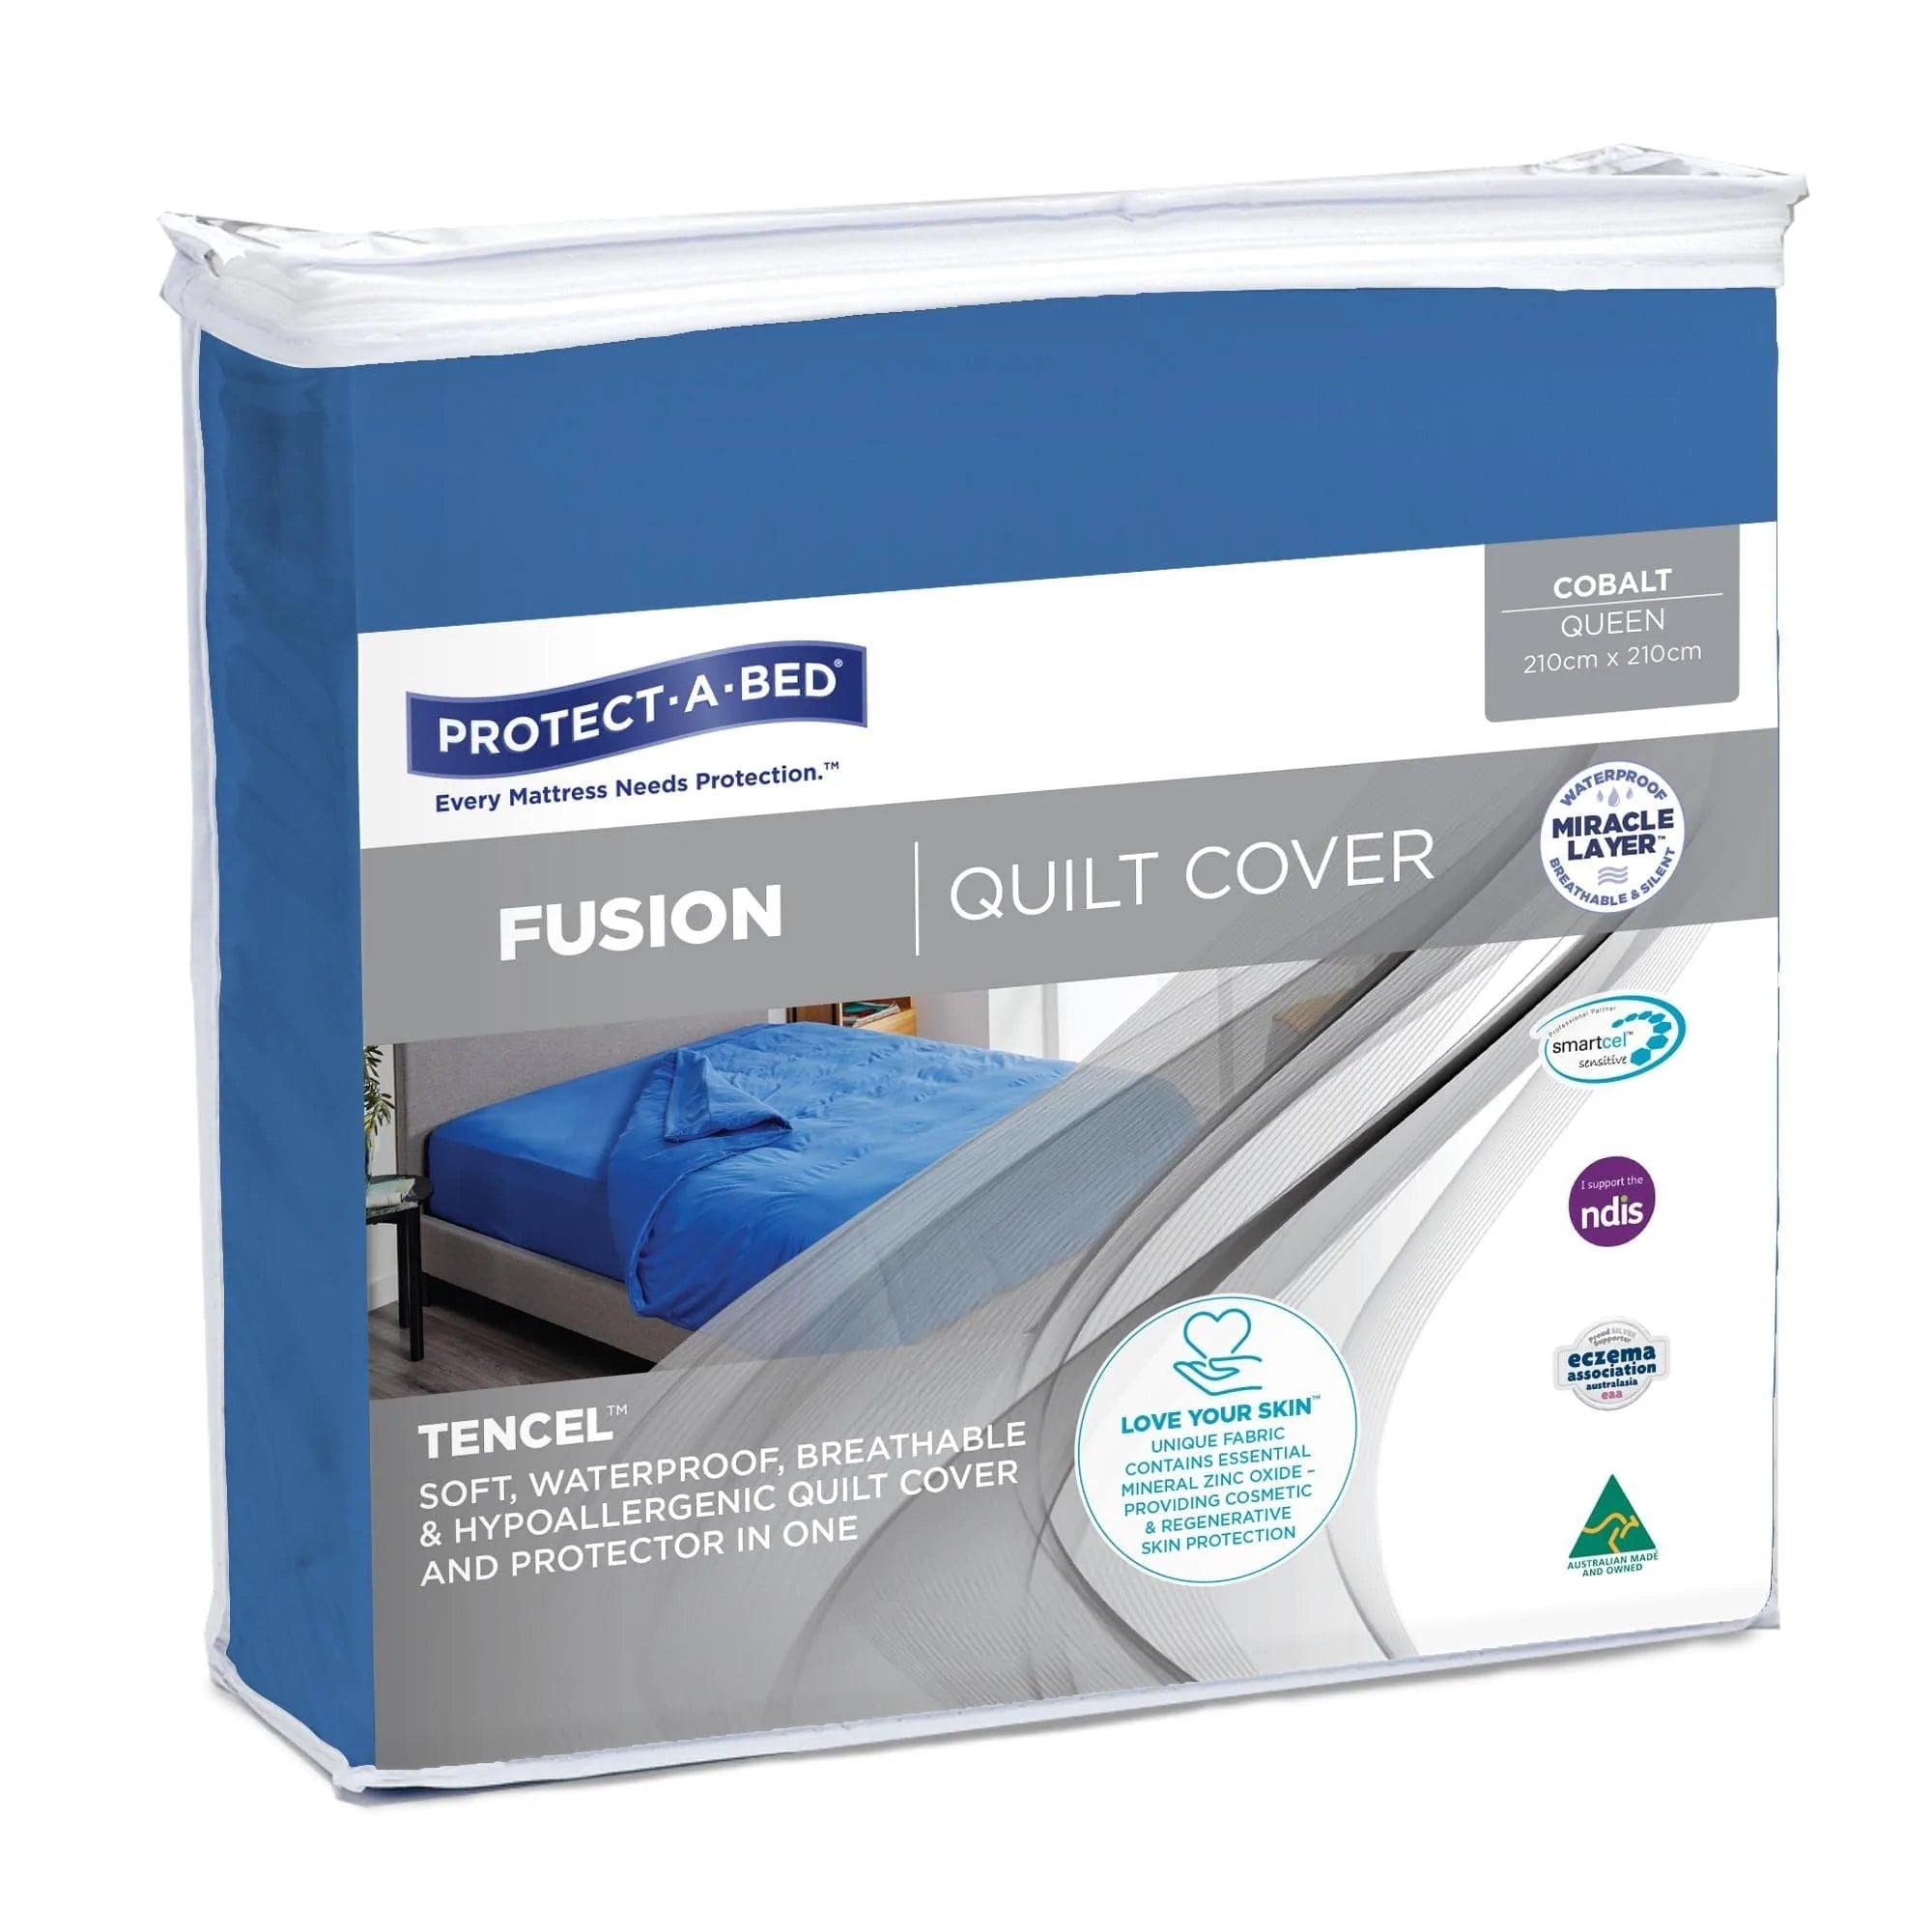 Protect A Bed Queen / Colbalt Fusion Quilt Cover SNUF0345QUE0__EA